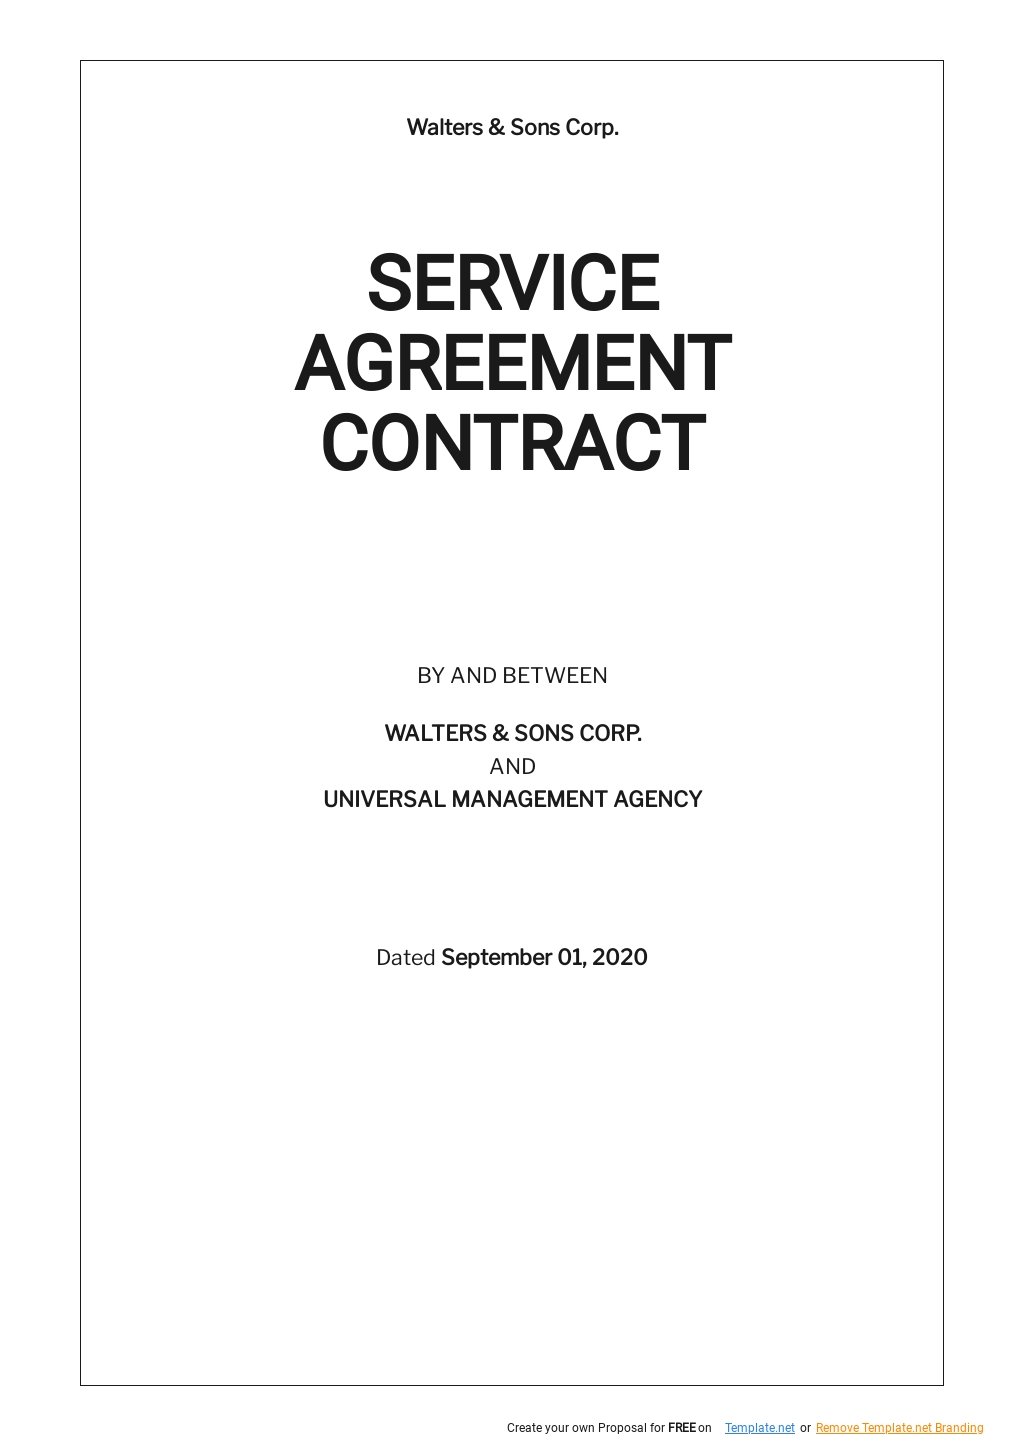 Free Service Agreement PDF Templates, 60+ Download